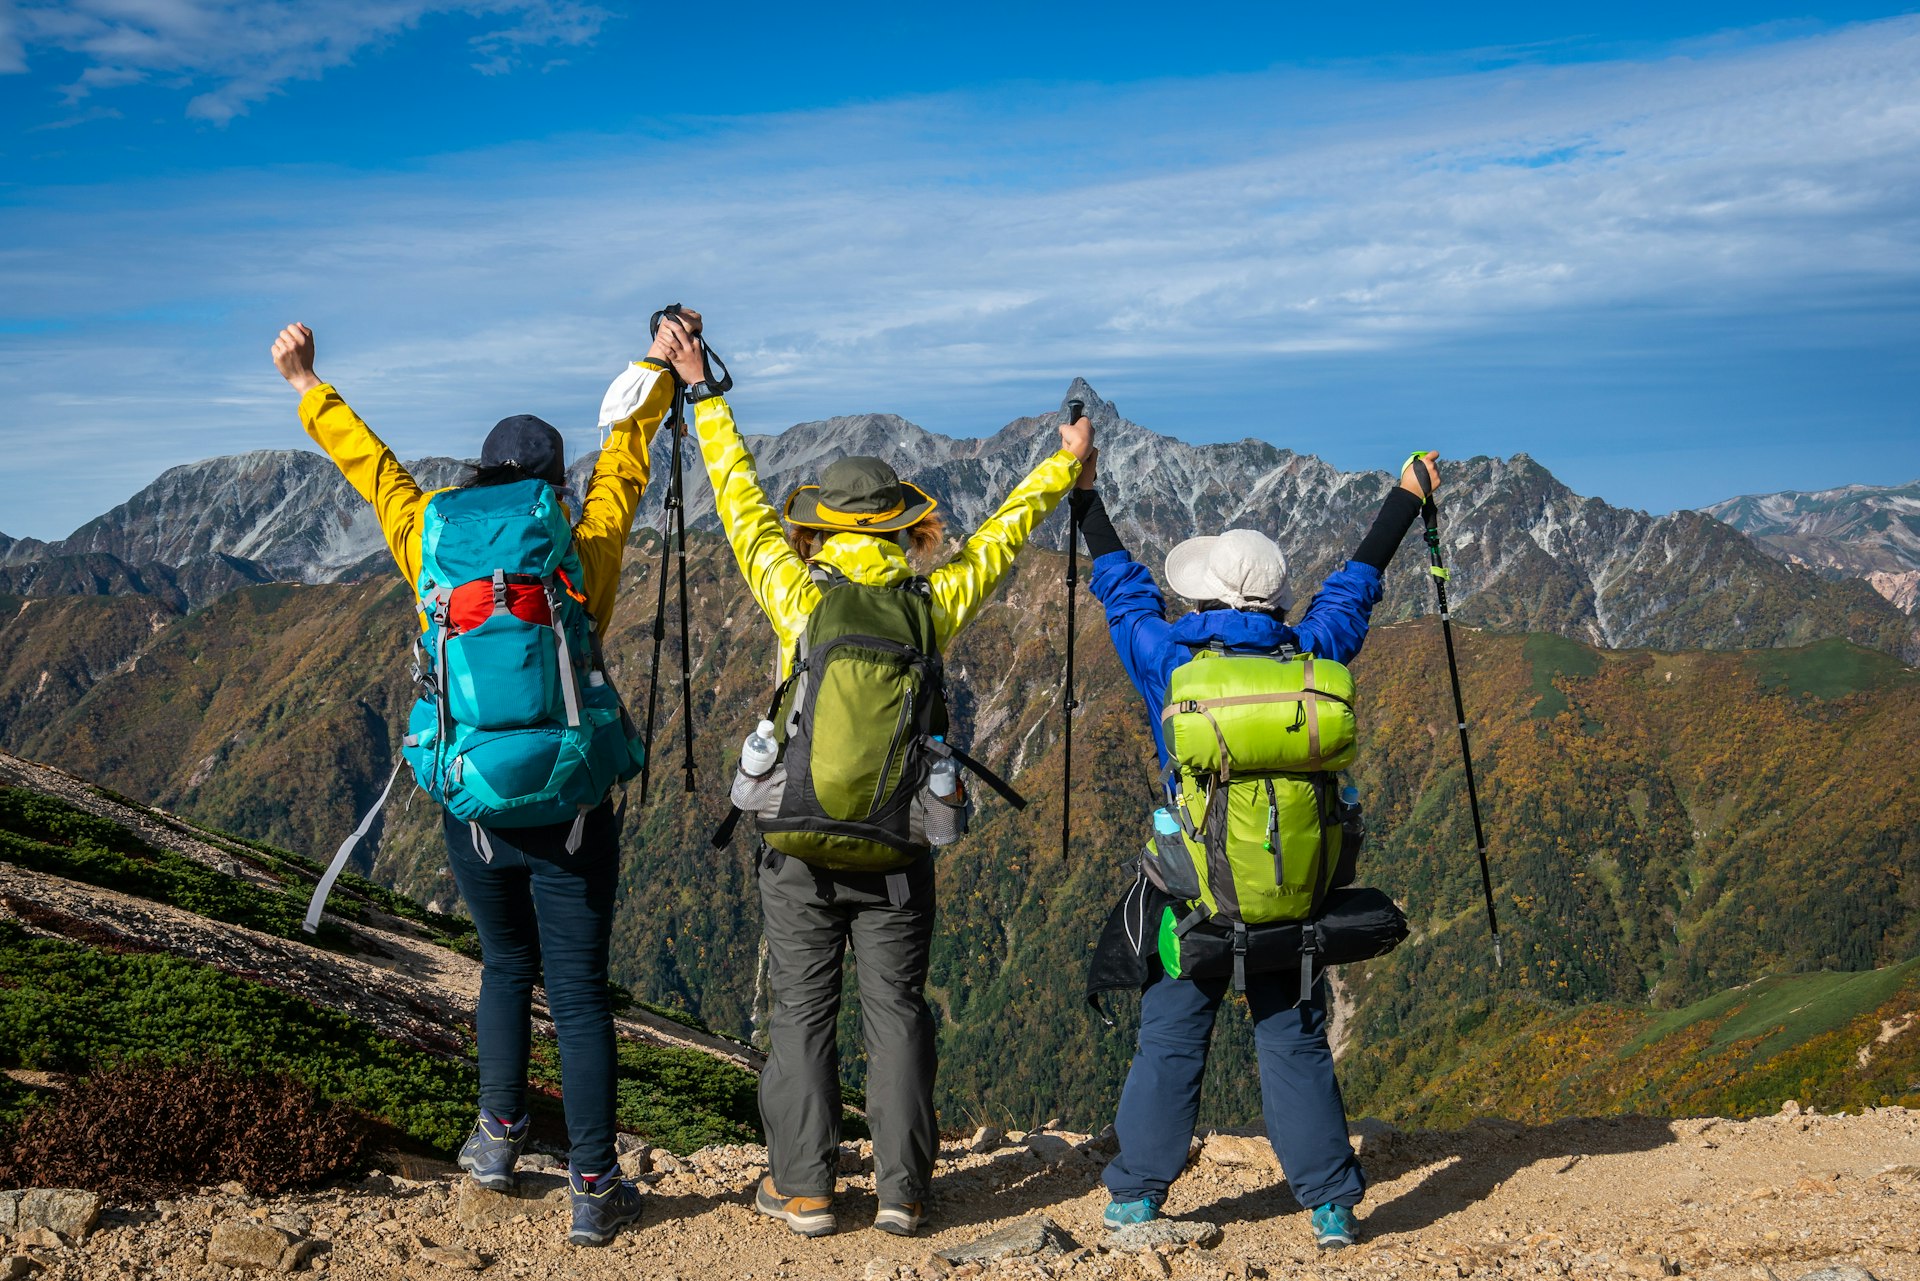 Three hikers with their arms in the air in a triumphant stance face out towards a mountain range